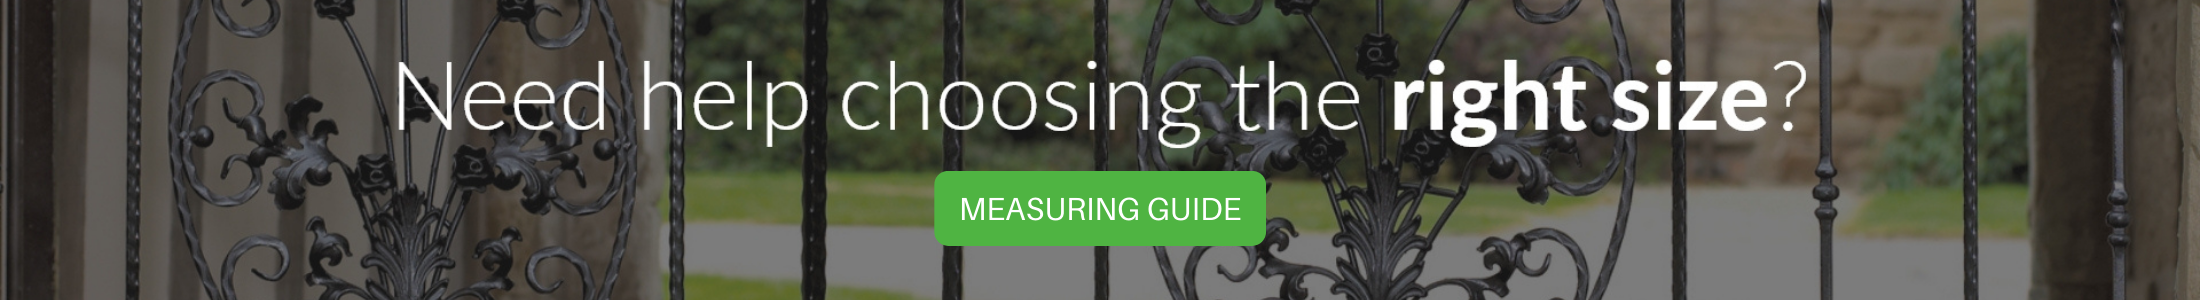 View the measuring guide - click here